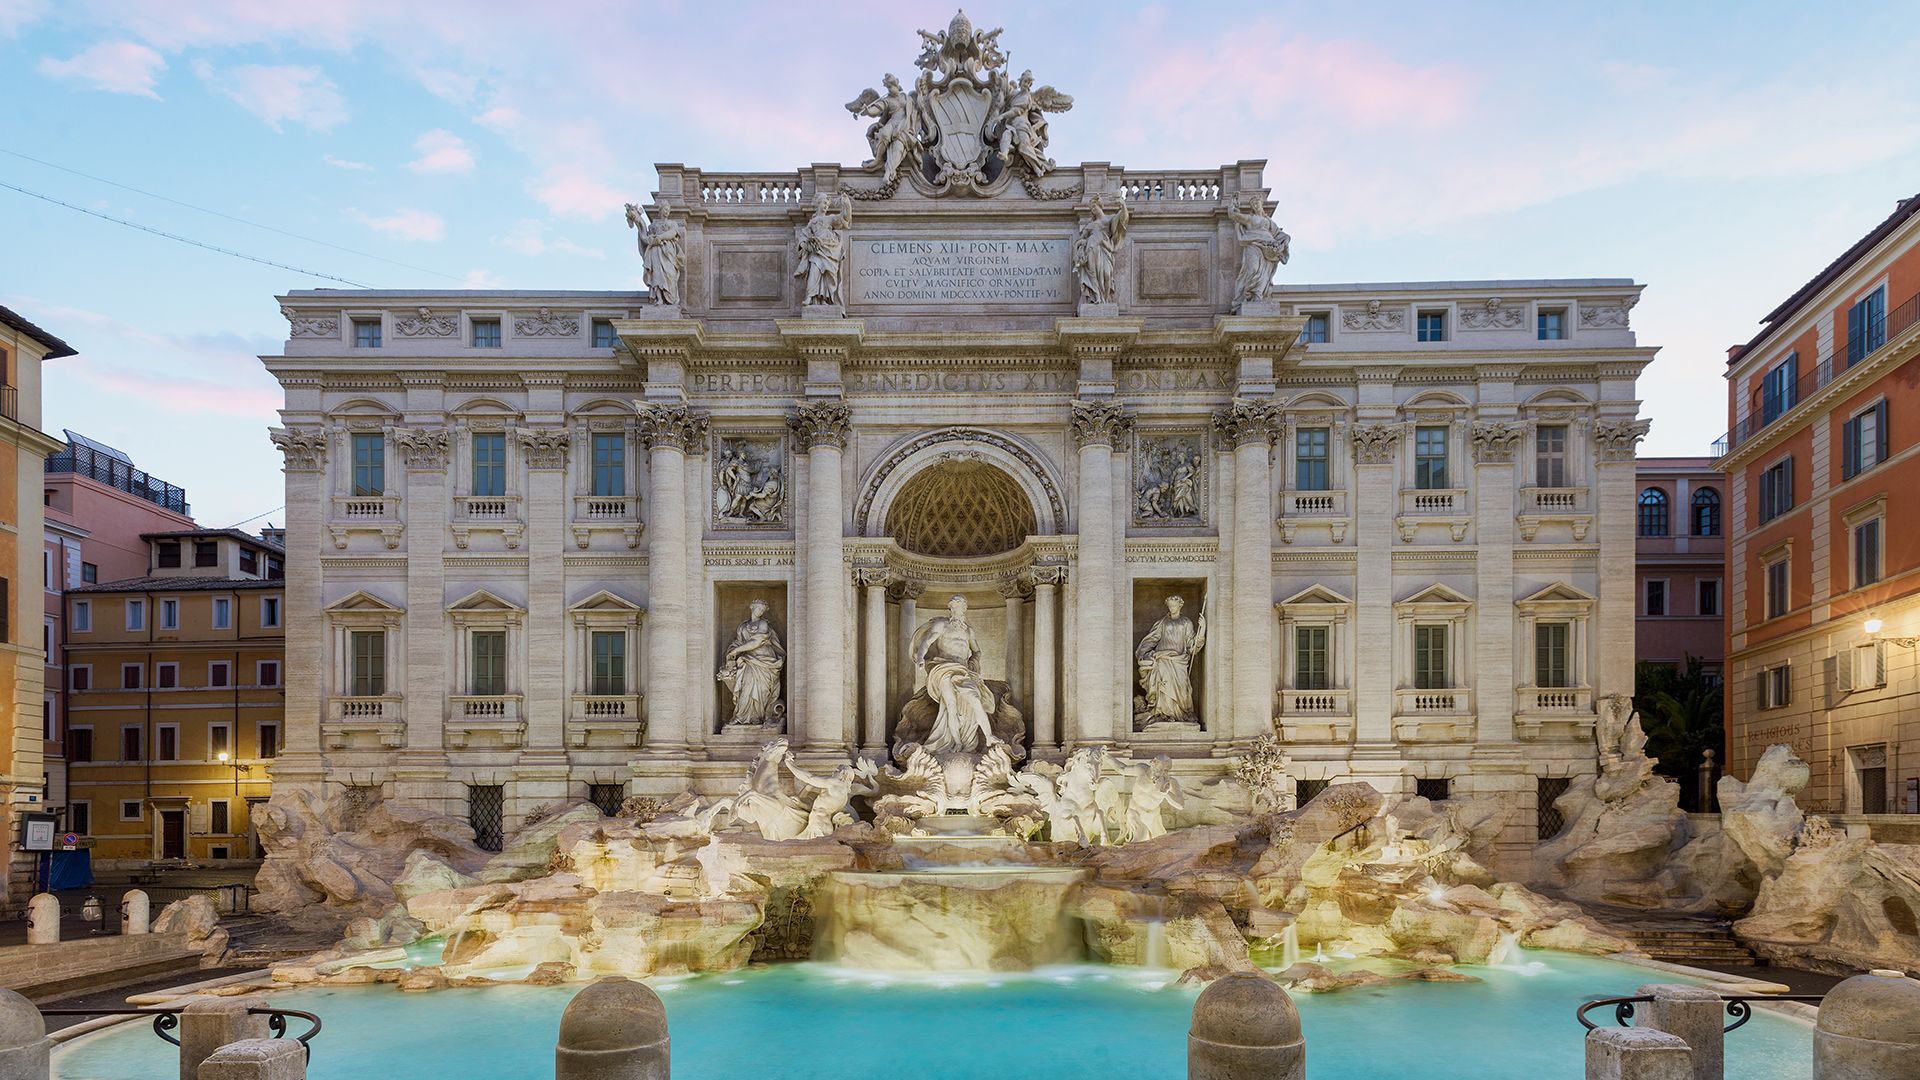 Rome may use the coins you throw into Trevi Fountain to pay its